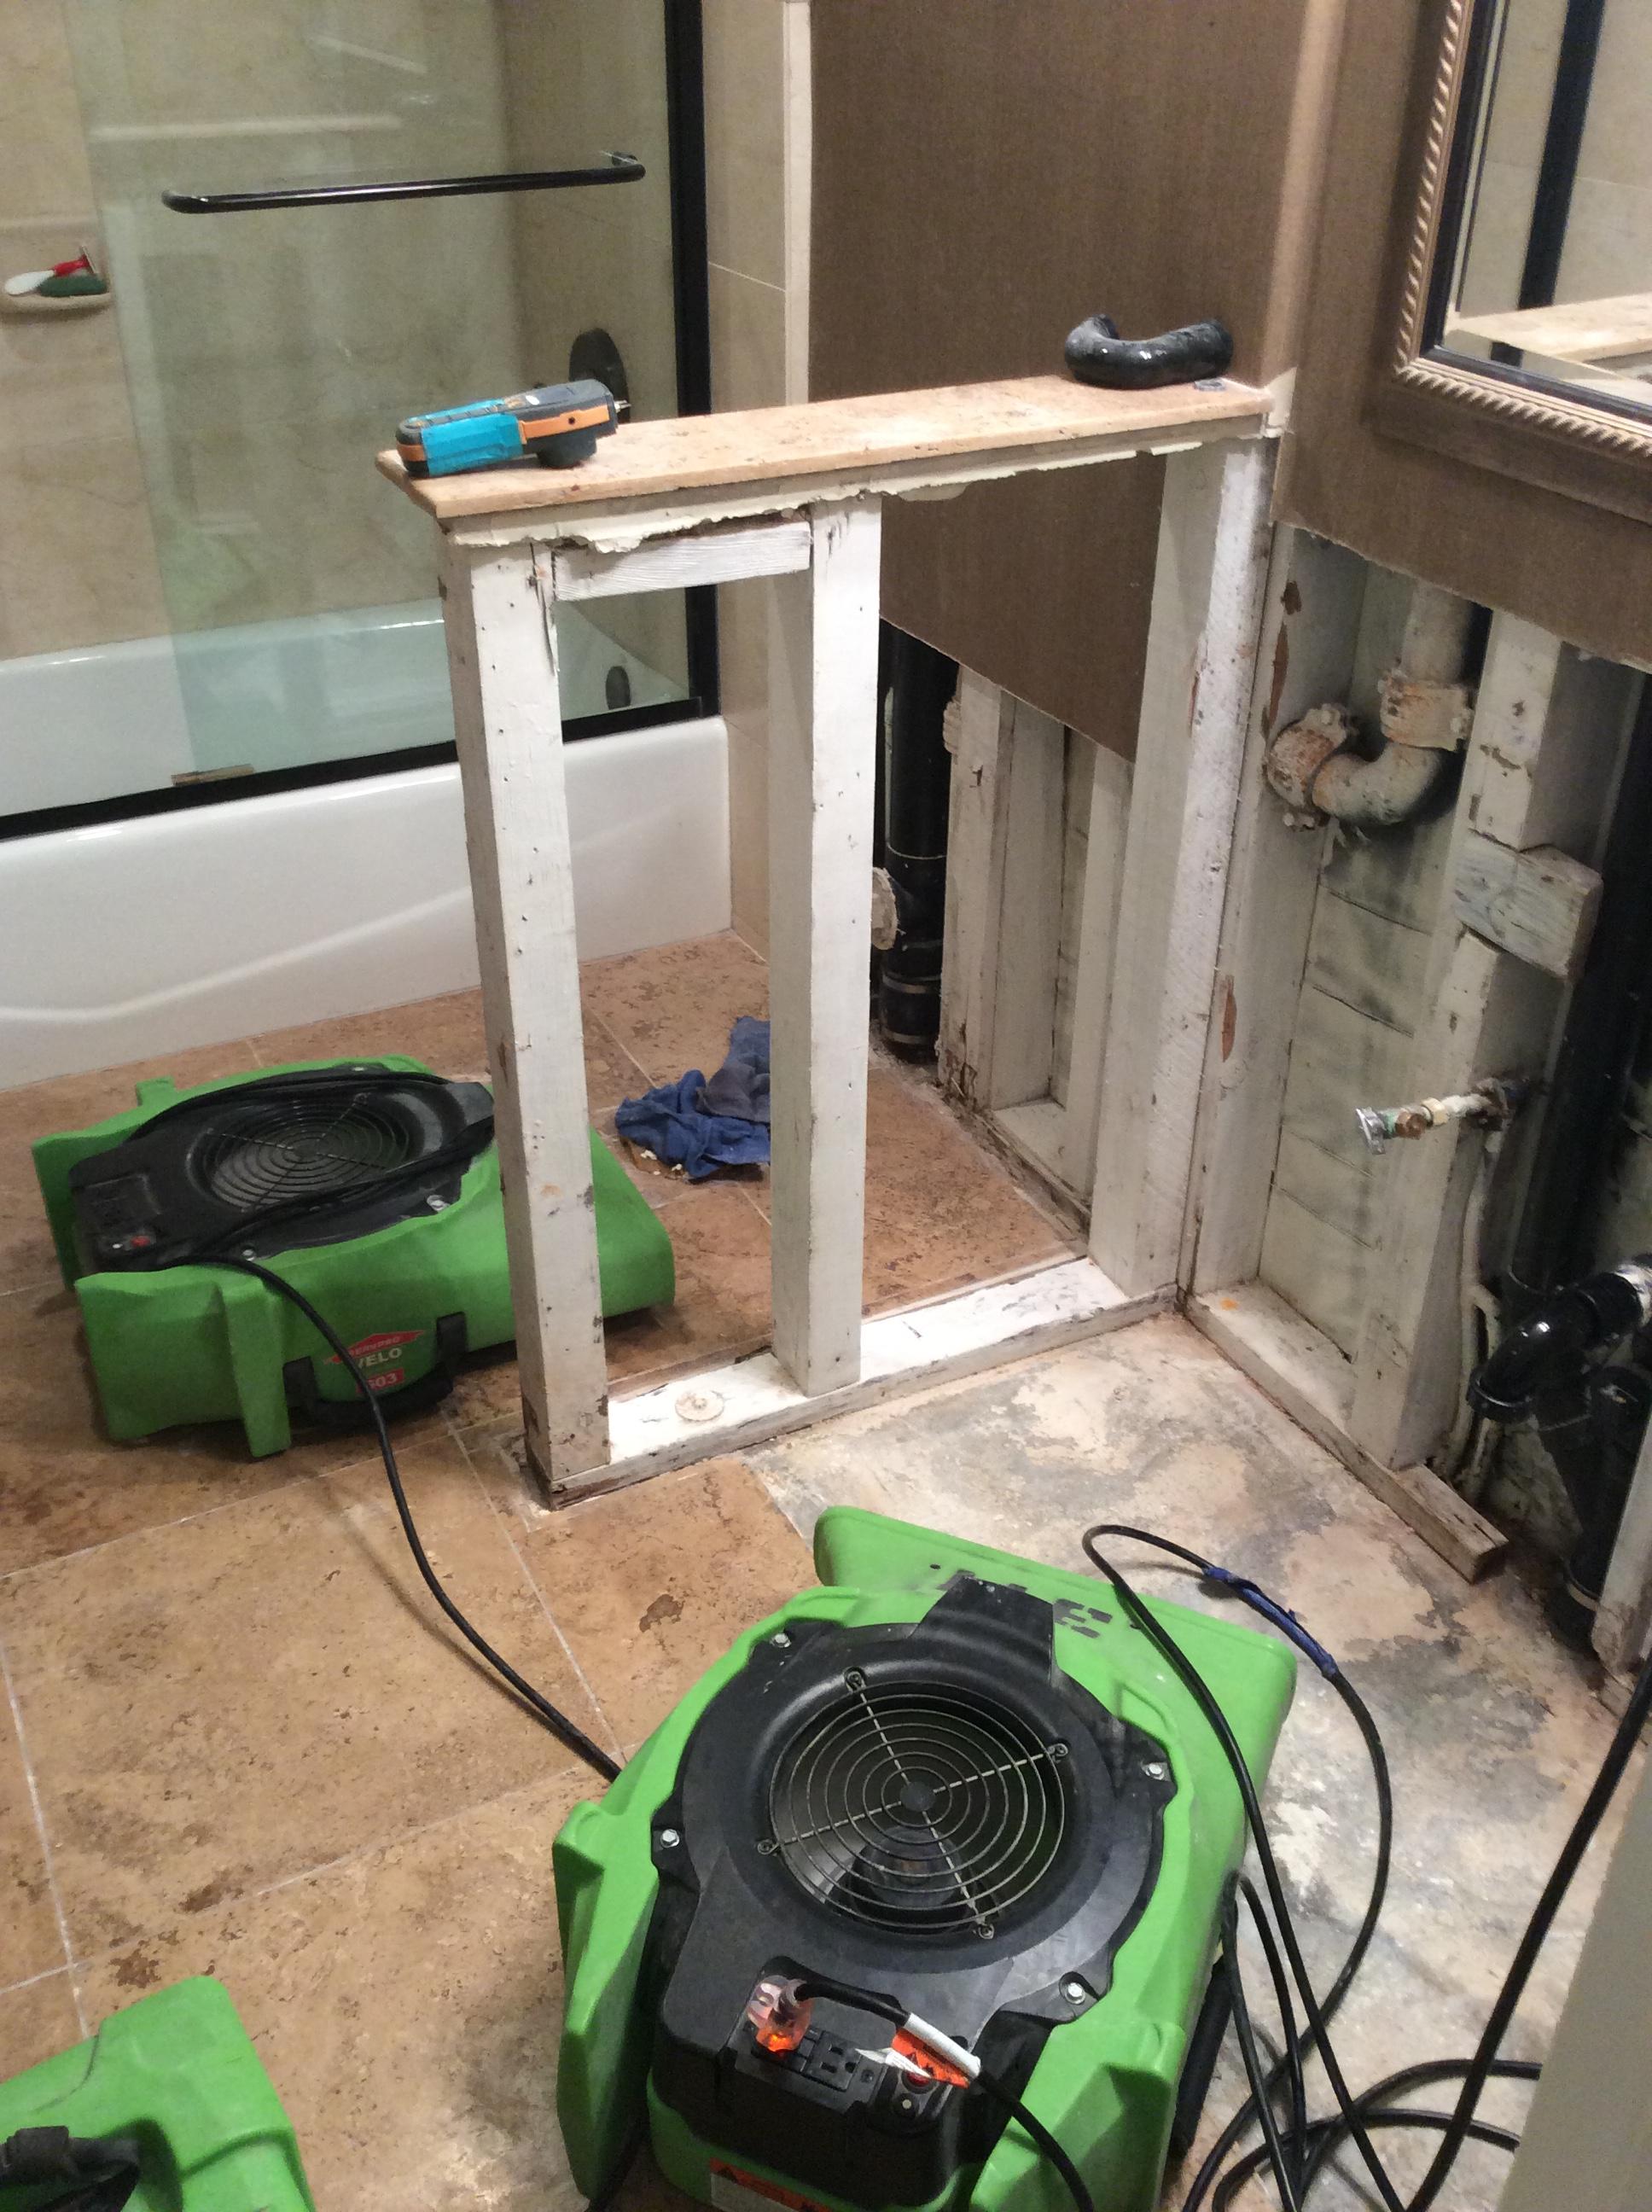 Got the SERVPRO equipment up and running during a residential restoration.